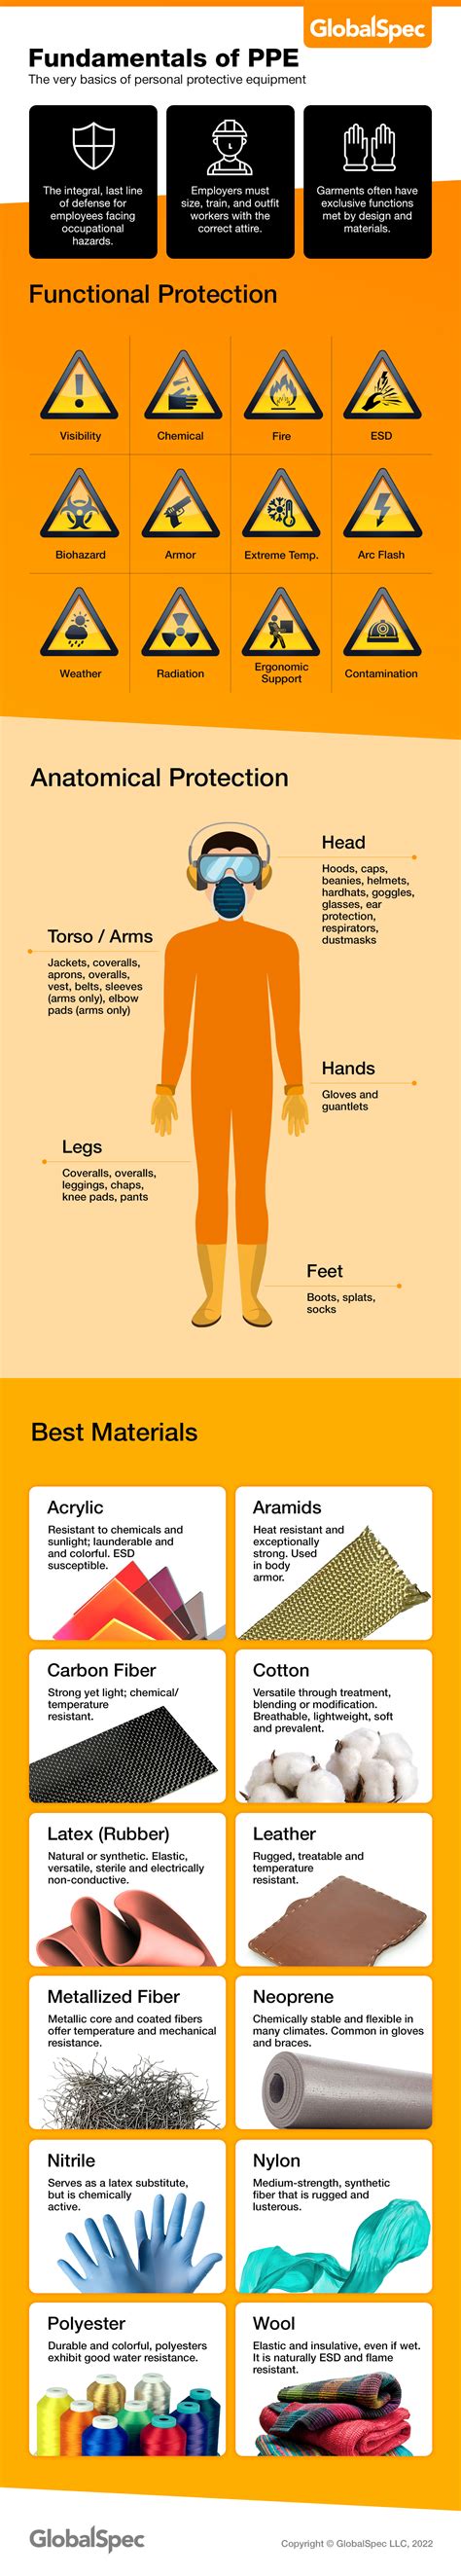 Infographic Fundamentals Of Ppe Globalspec